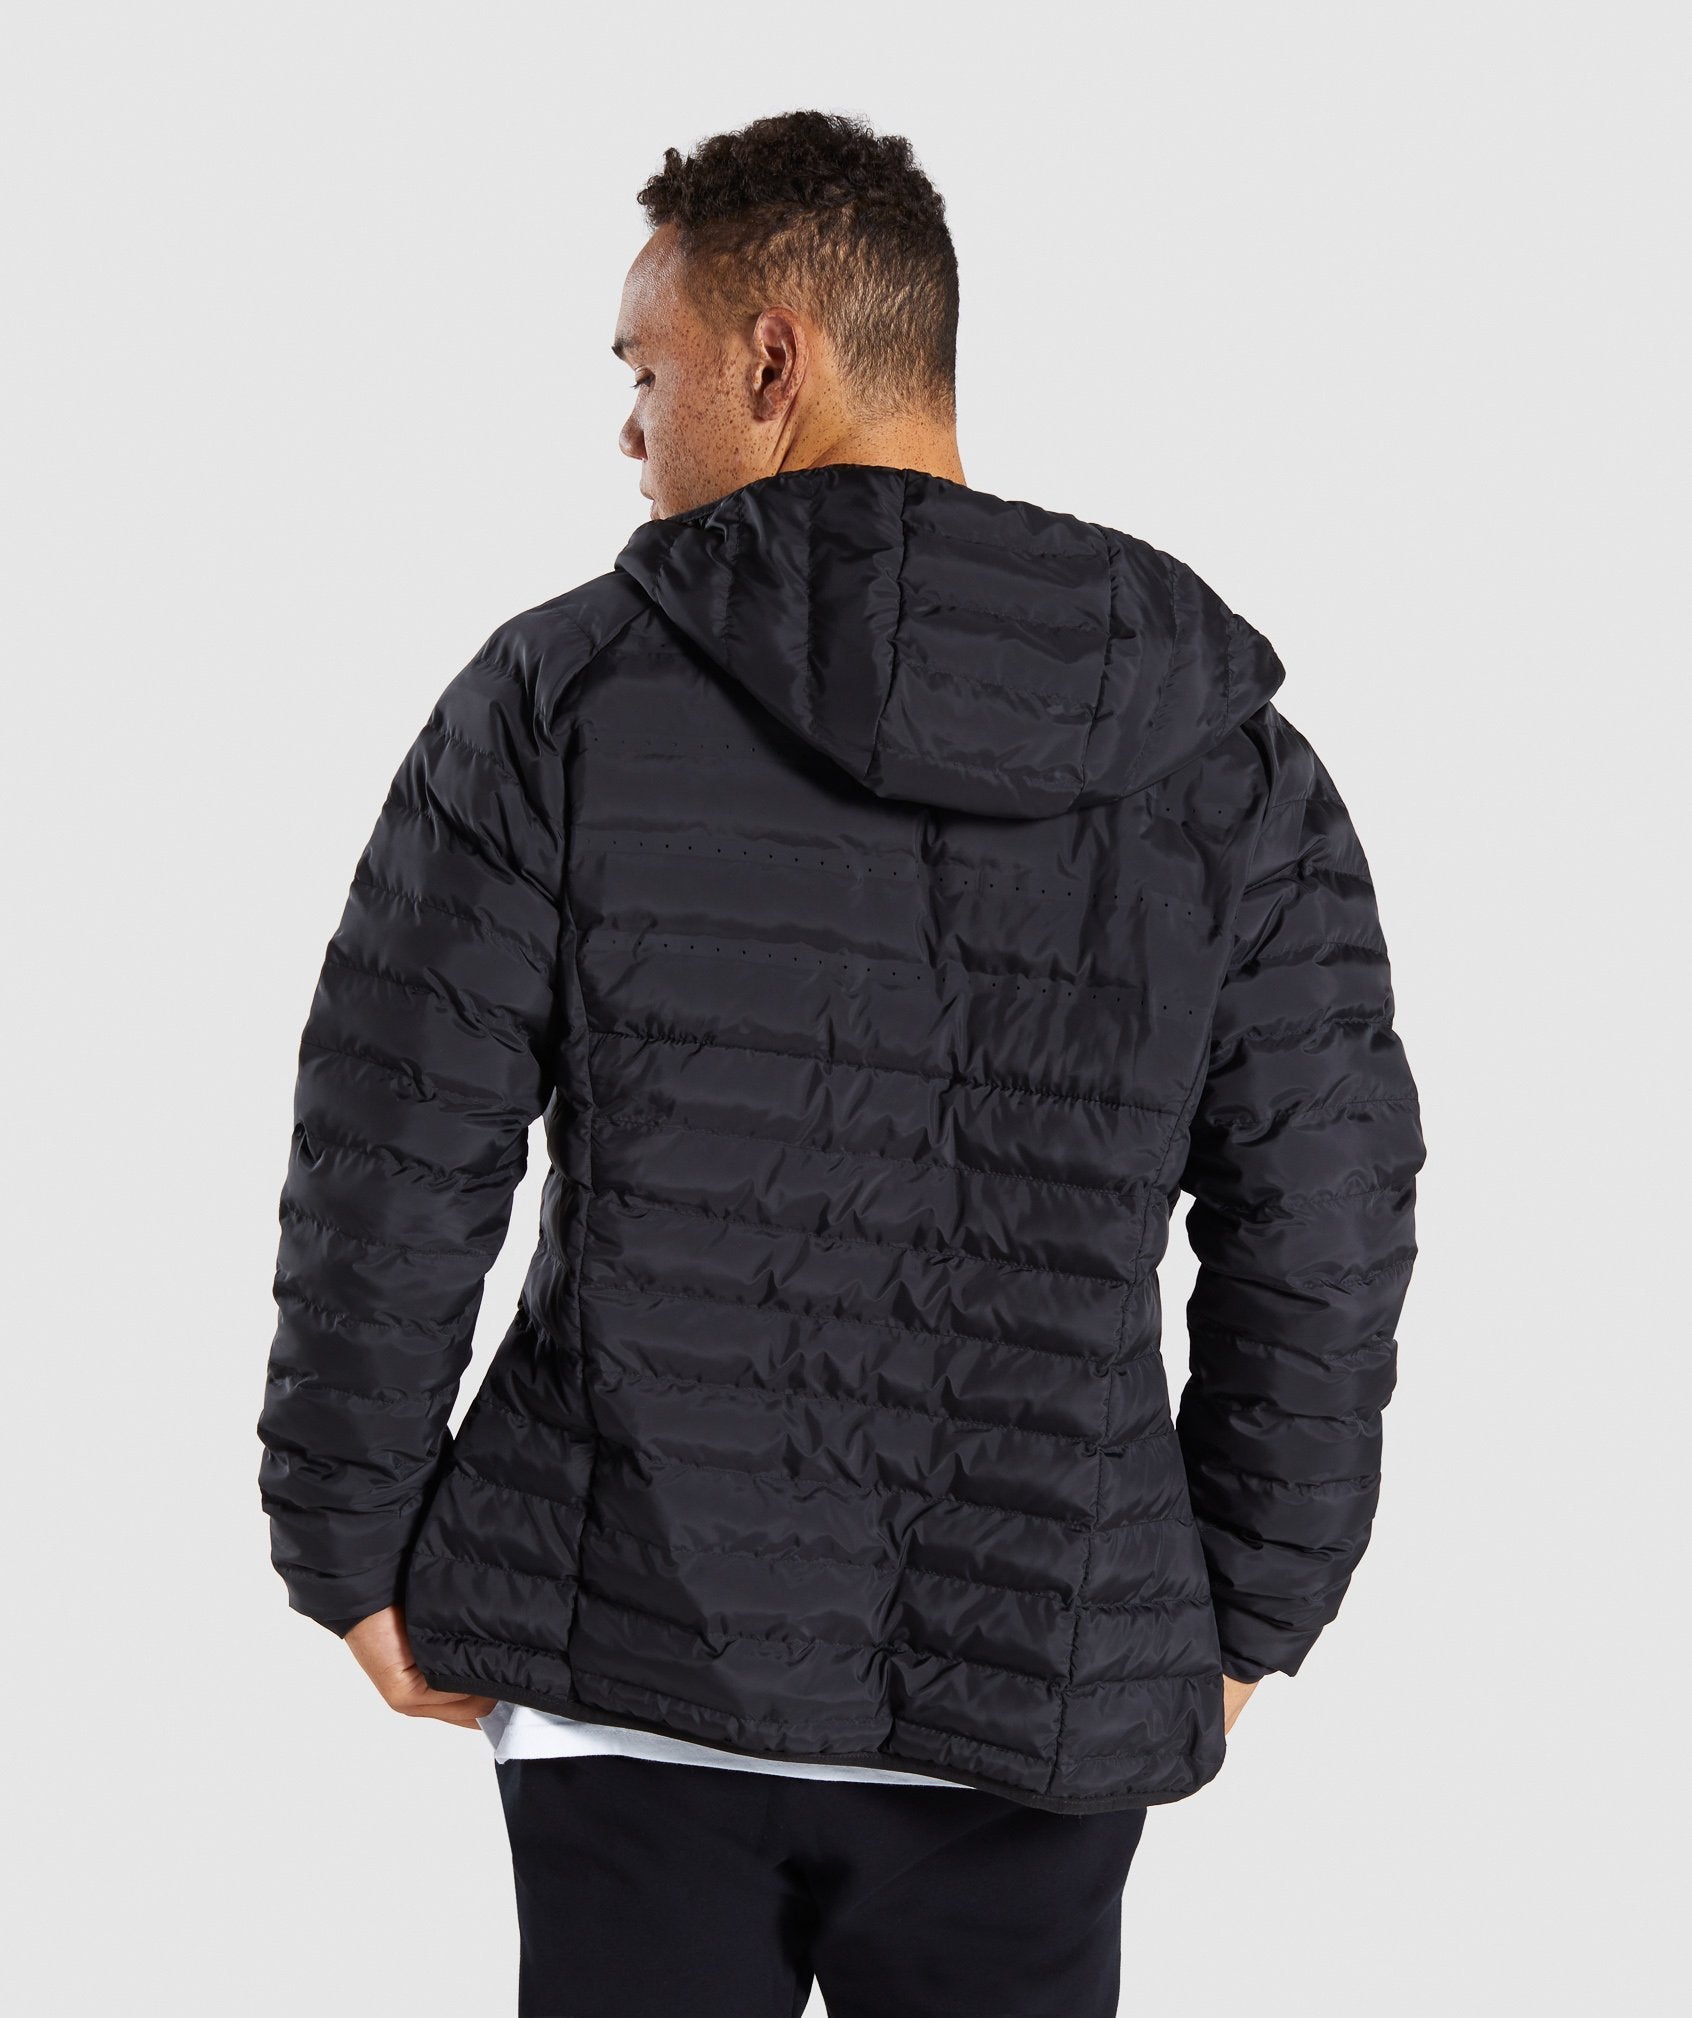 Sector Jacket V2 in Black - view 2